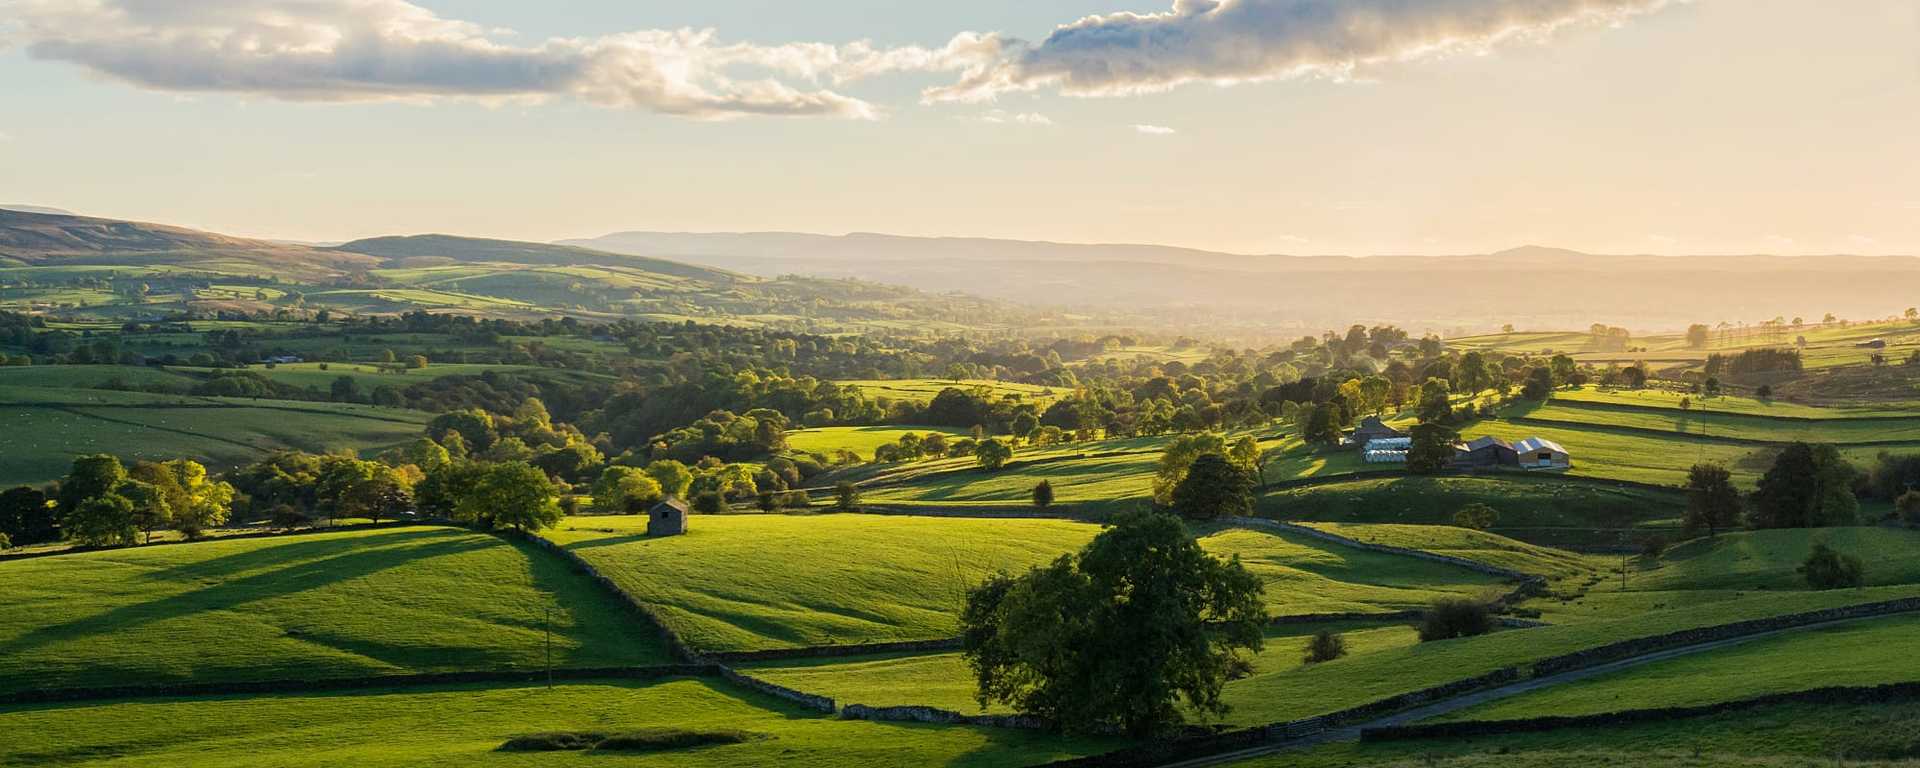 Romantic English countryside in the Pennines